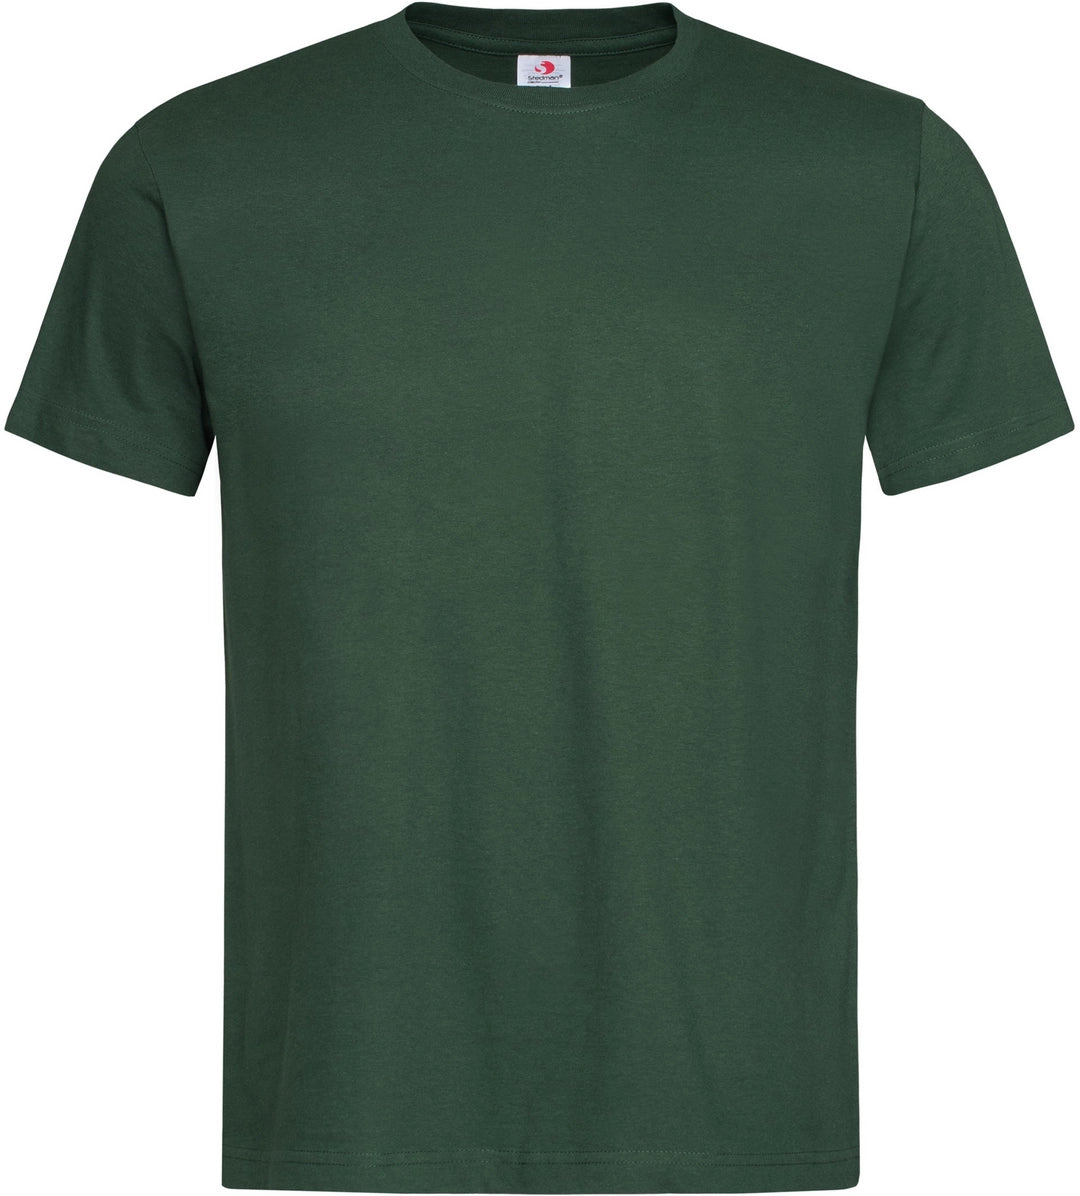 Classic T-Shirt 155gsm Adult Main color - COOZO